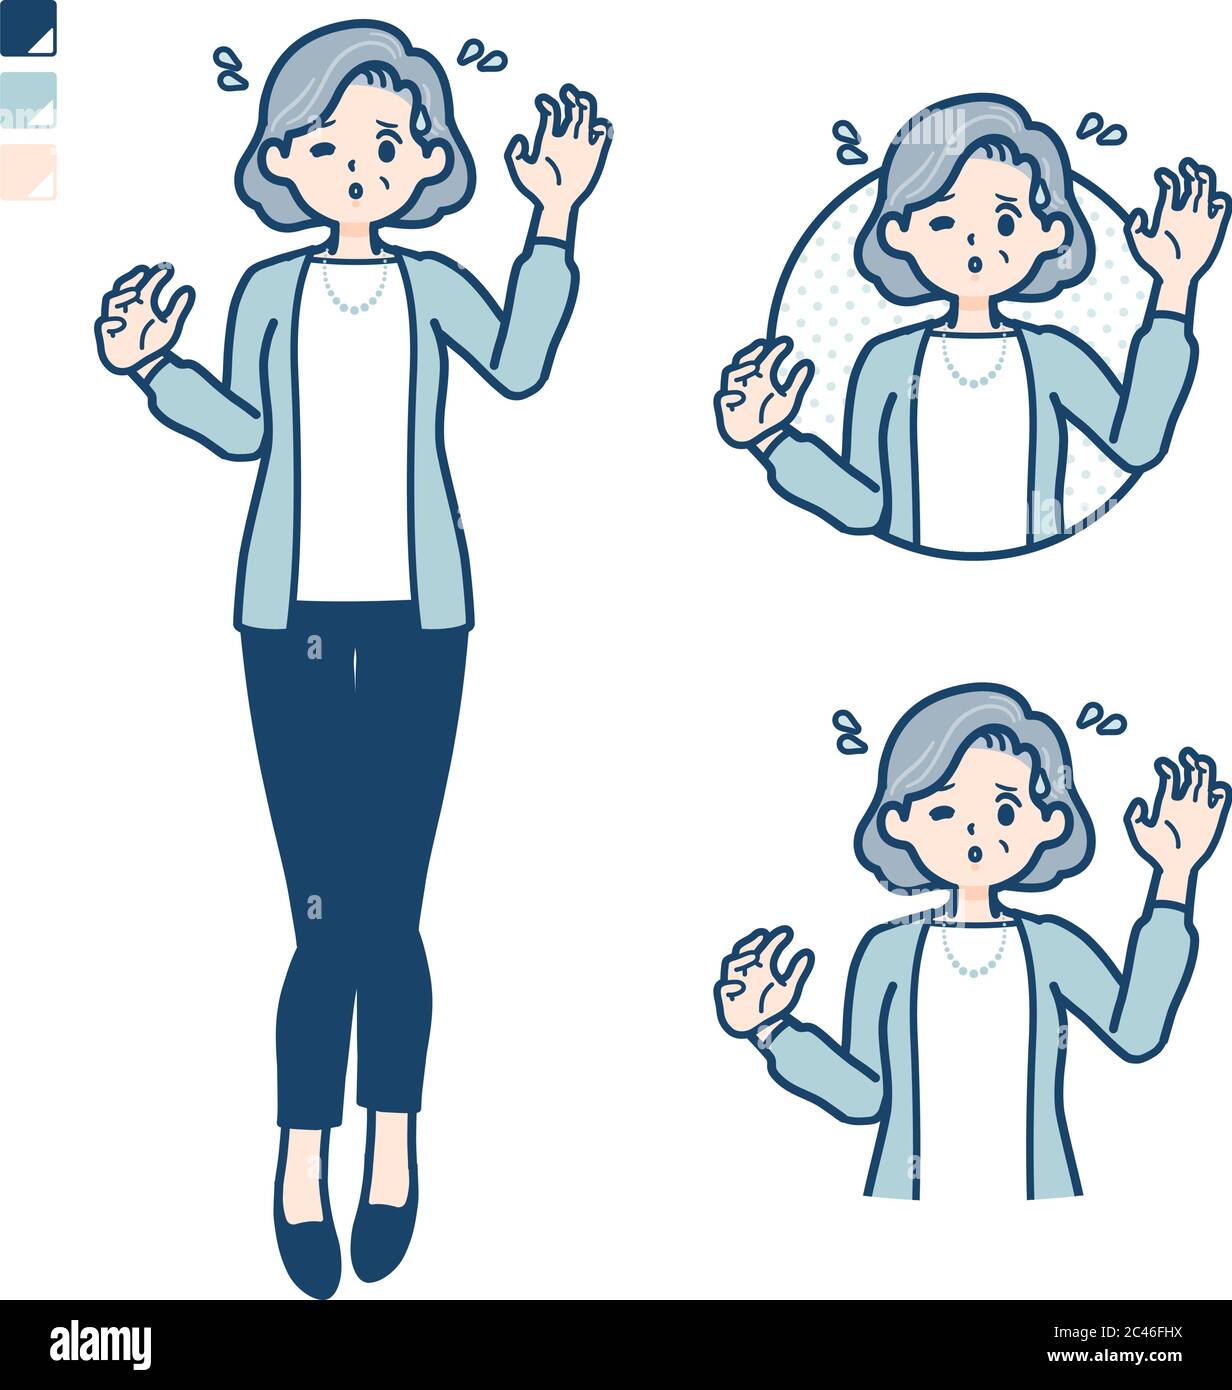 Senior woman in a suit with panic images. It's vector art so it's easy to edit. Stock Vector